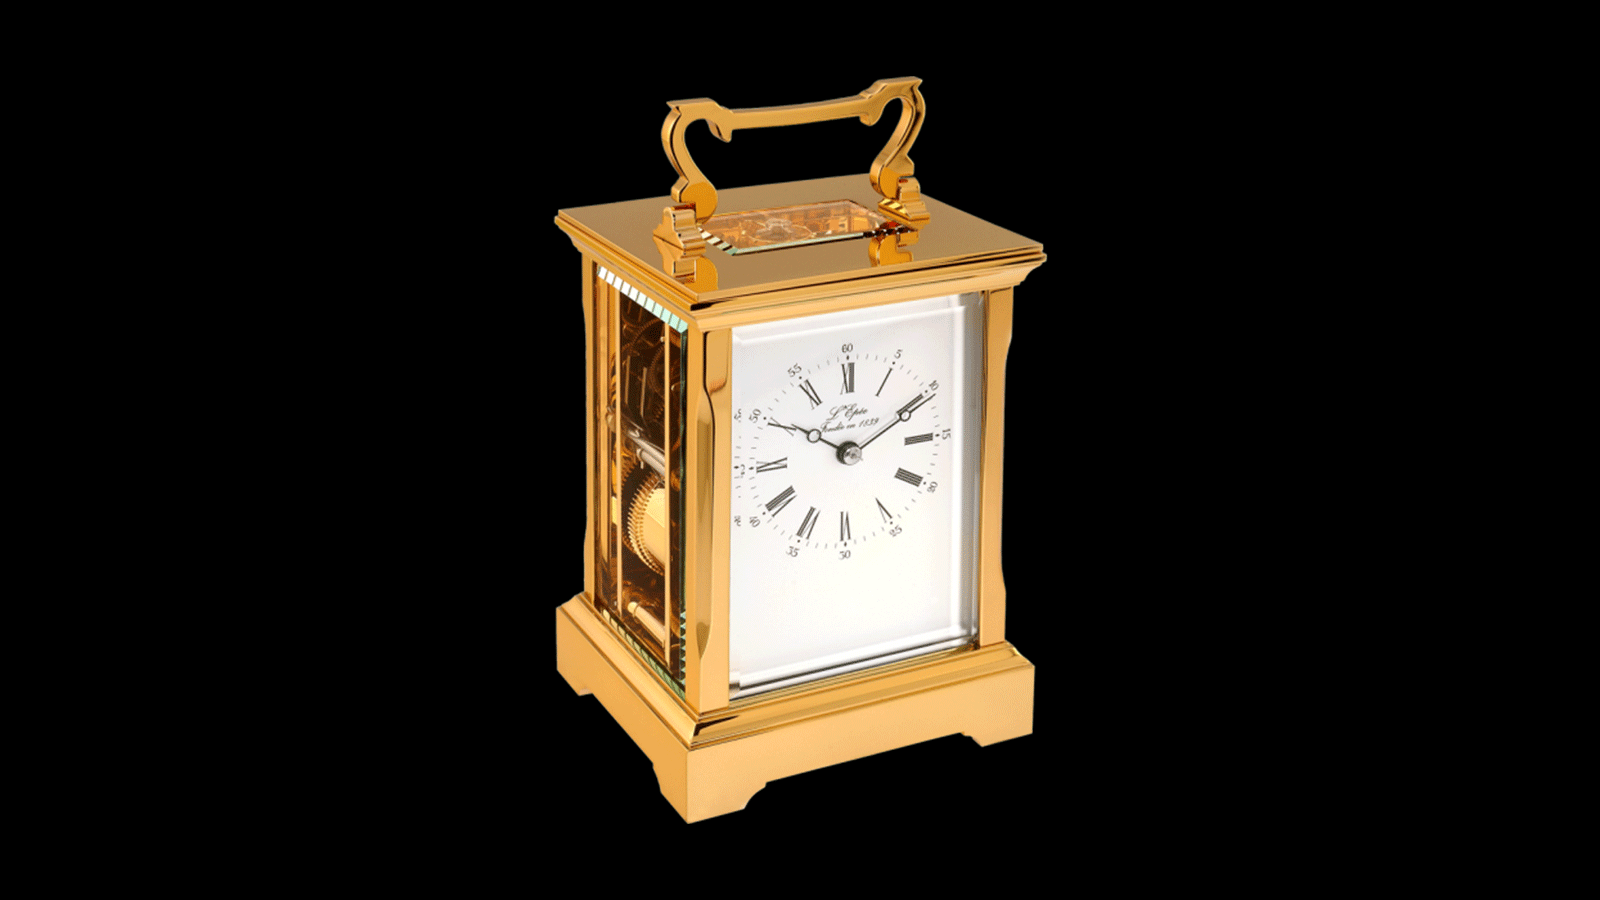 Both in England and in France from the middle of the 18th century, the gradual evolution of marine timekeepers (chronometers) could be regarded as a facet in the development of portable clocks designed for journeys. 